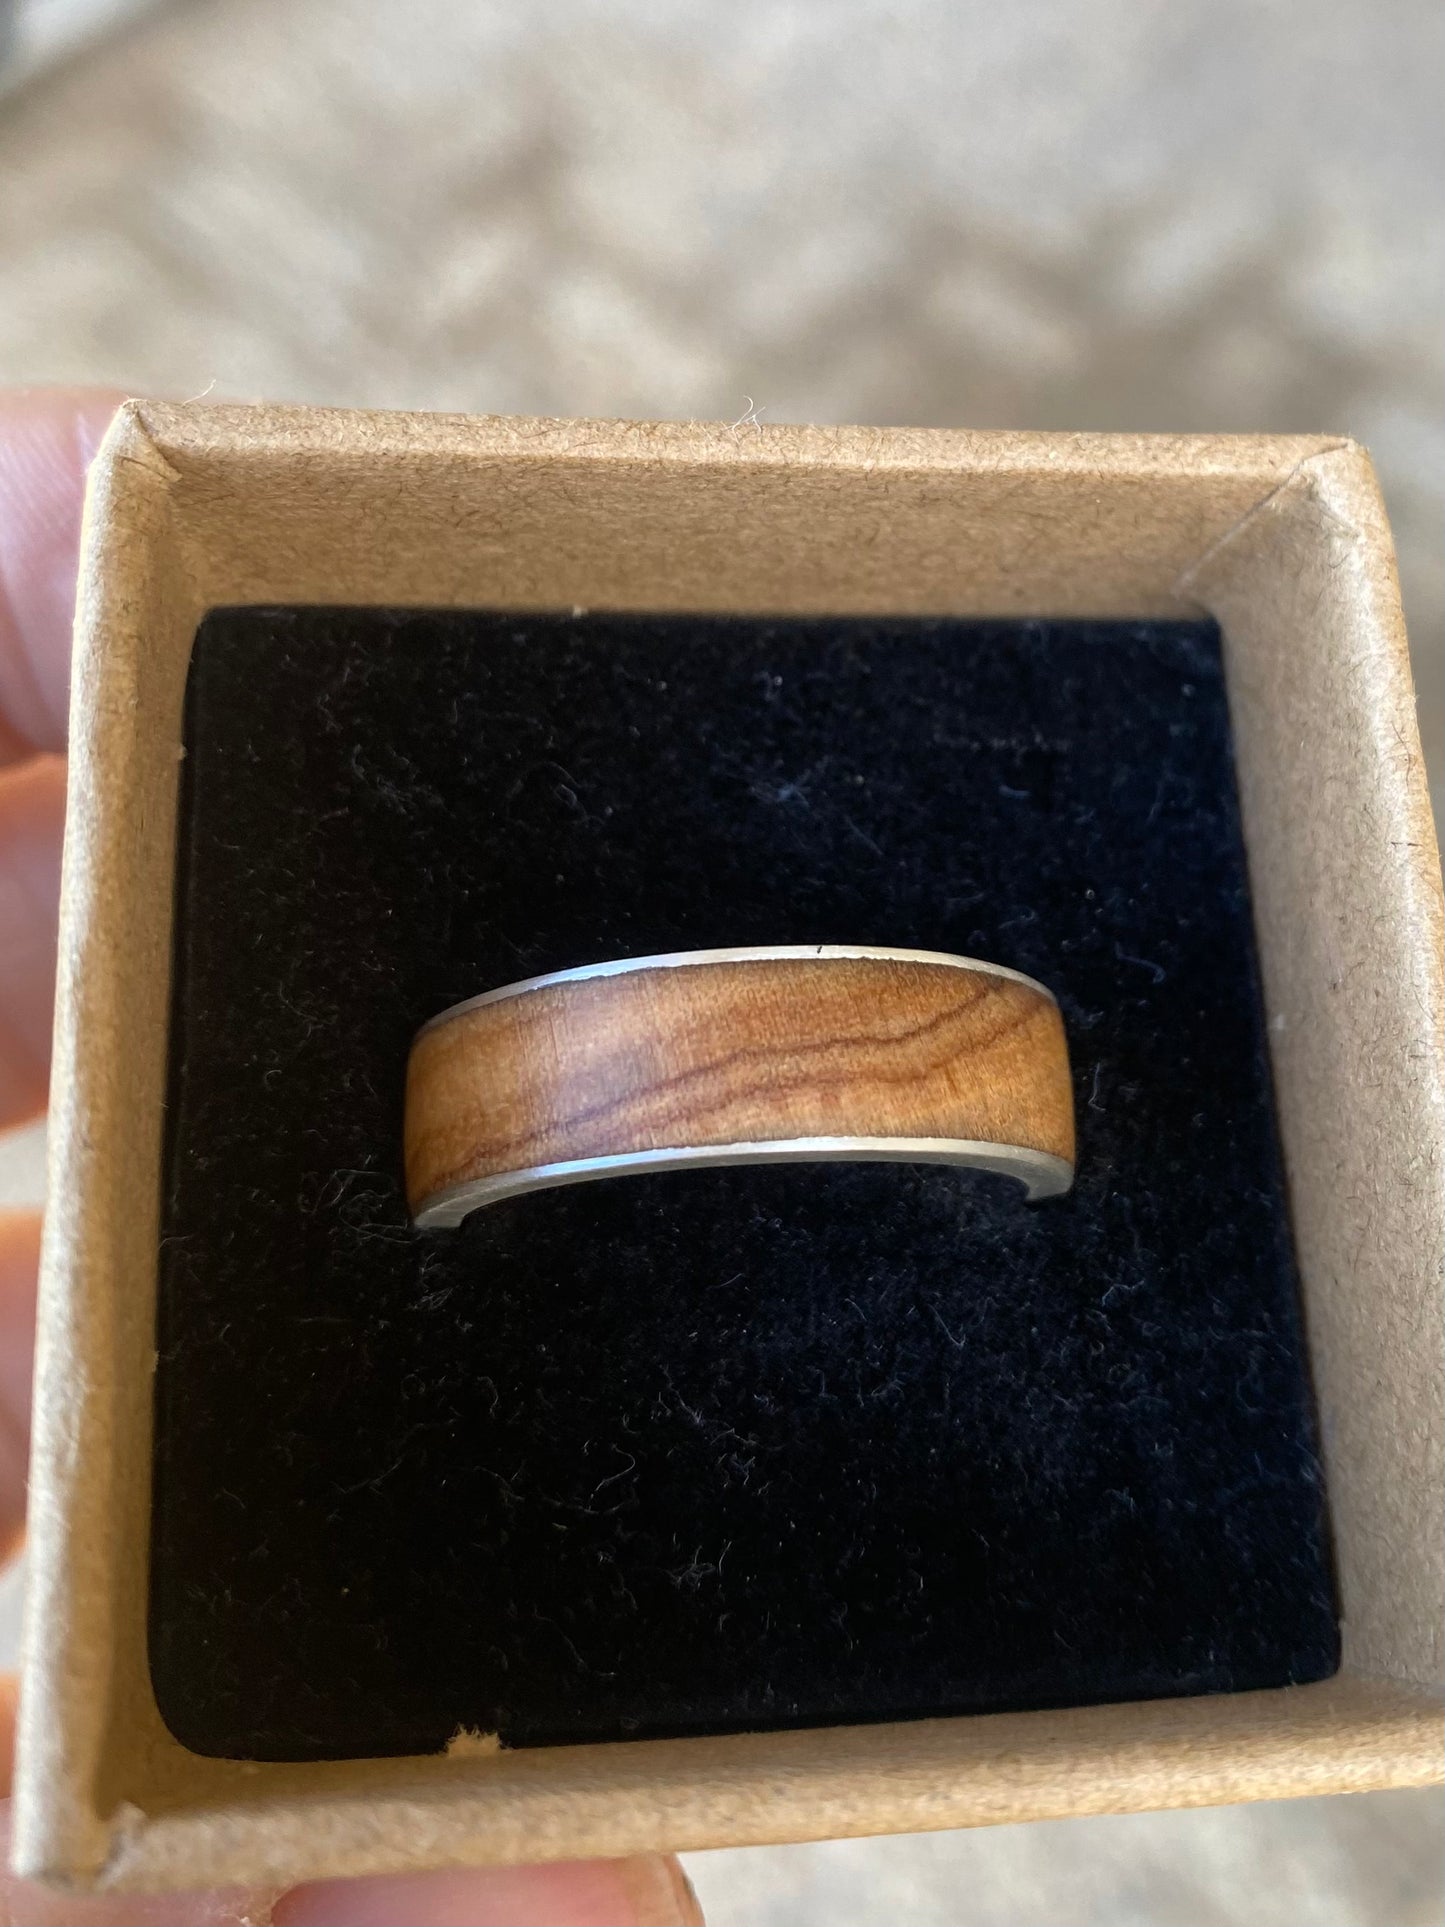 Olive wood with thin silver sides